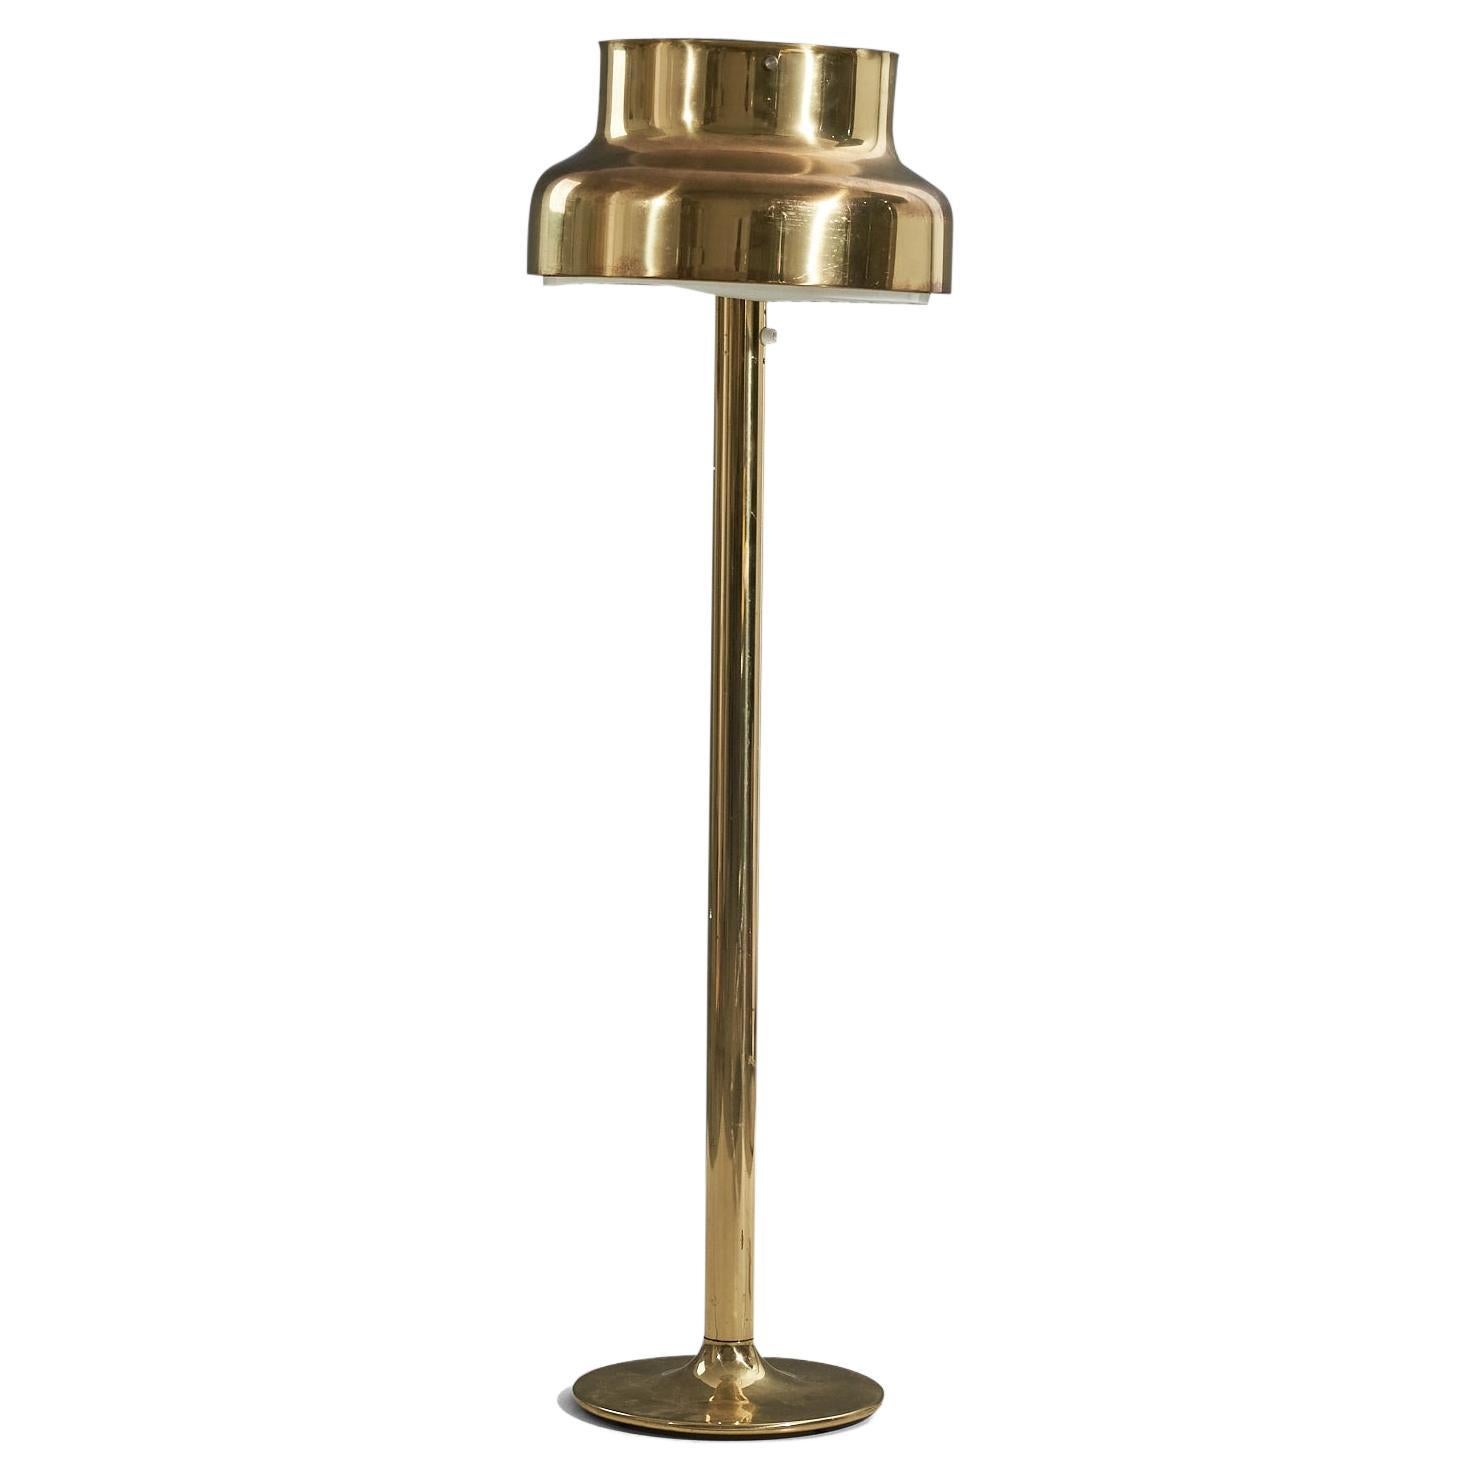 Anders Pehrson, Early "Bumling" Floor Lamp, Brass, Ateljé Lyktan, Sweden, 1960s For Sale